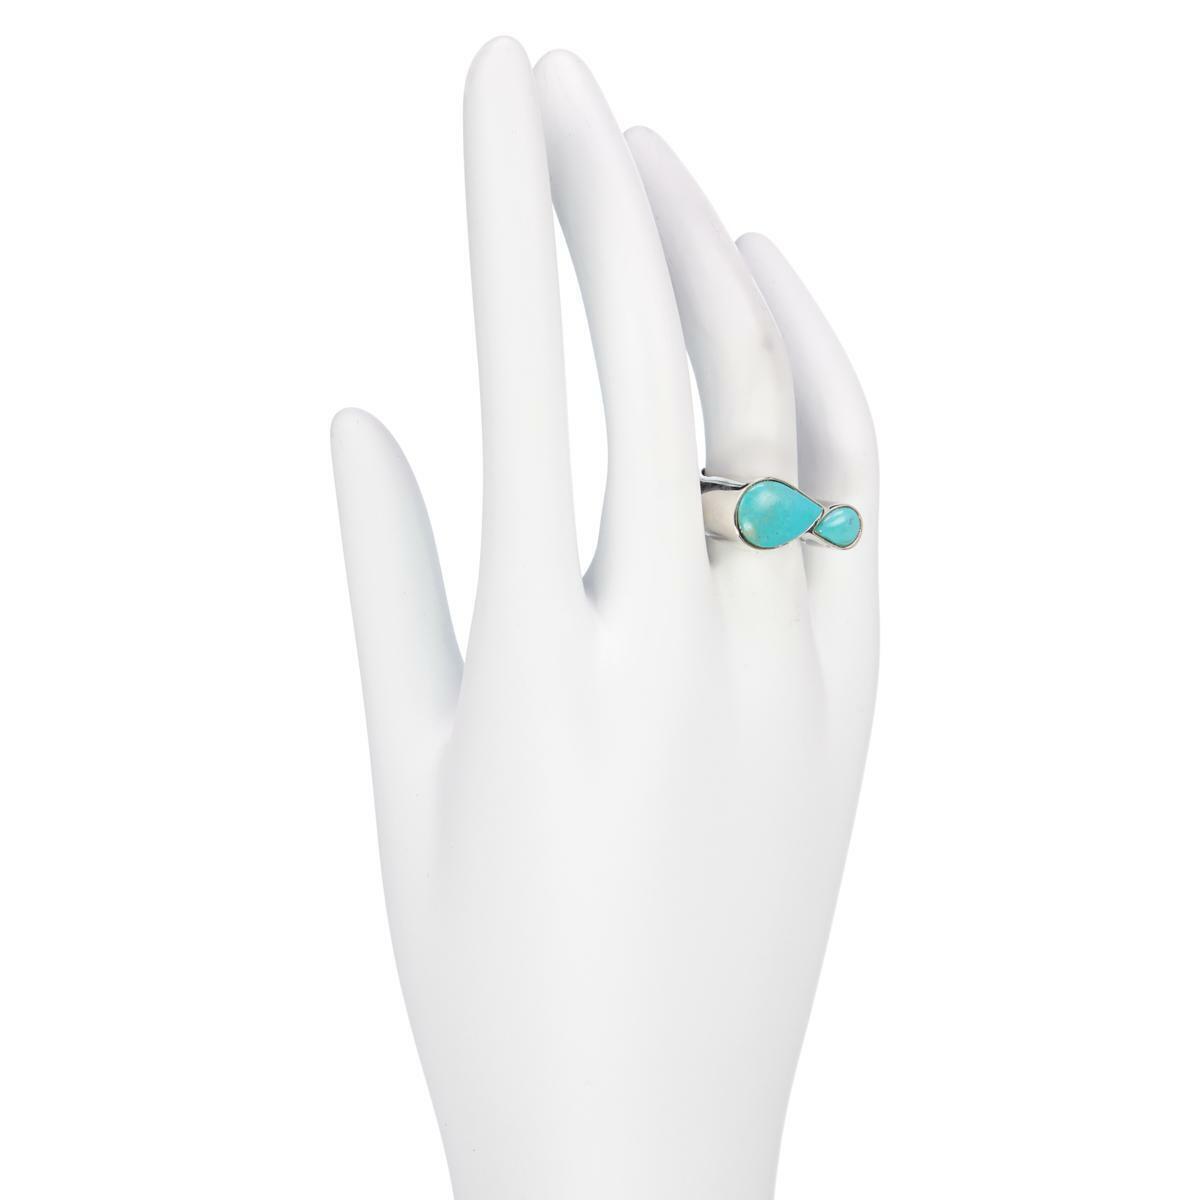 Jay King 2-Stone Turquoise Hill Turquoise Sterling Silver Ring Size 8 HSN $90